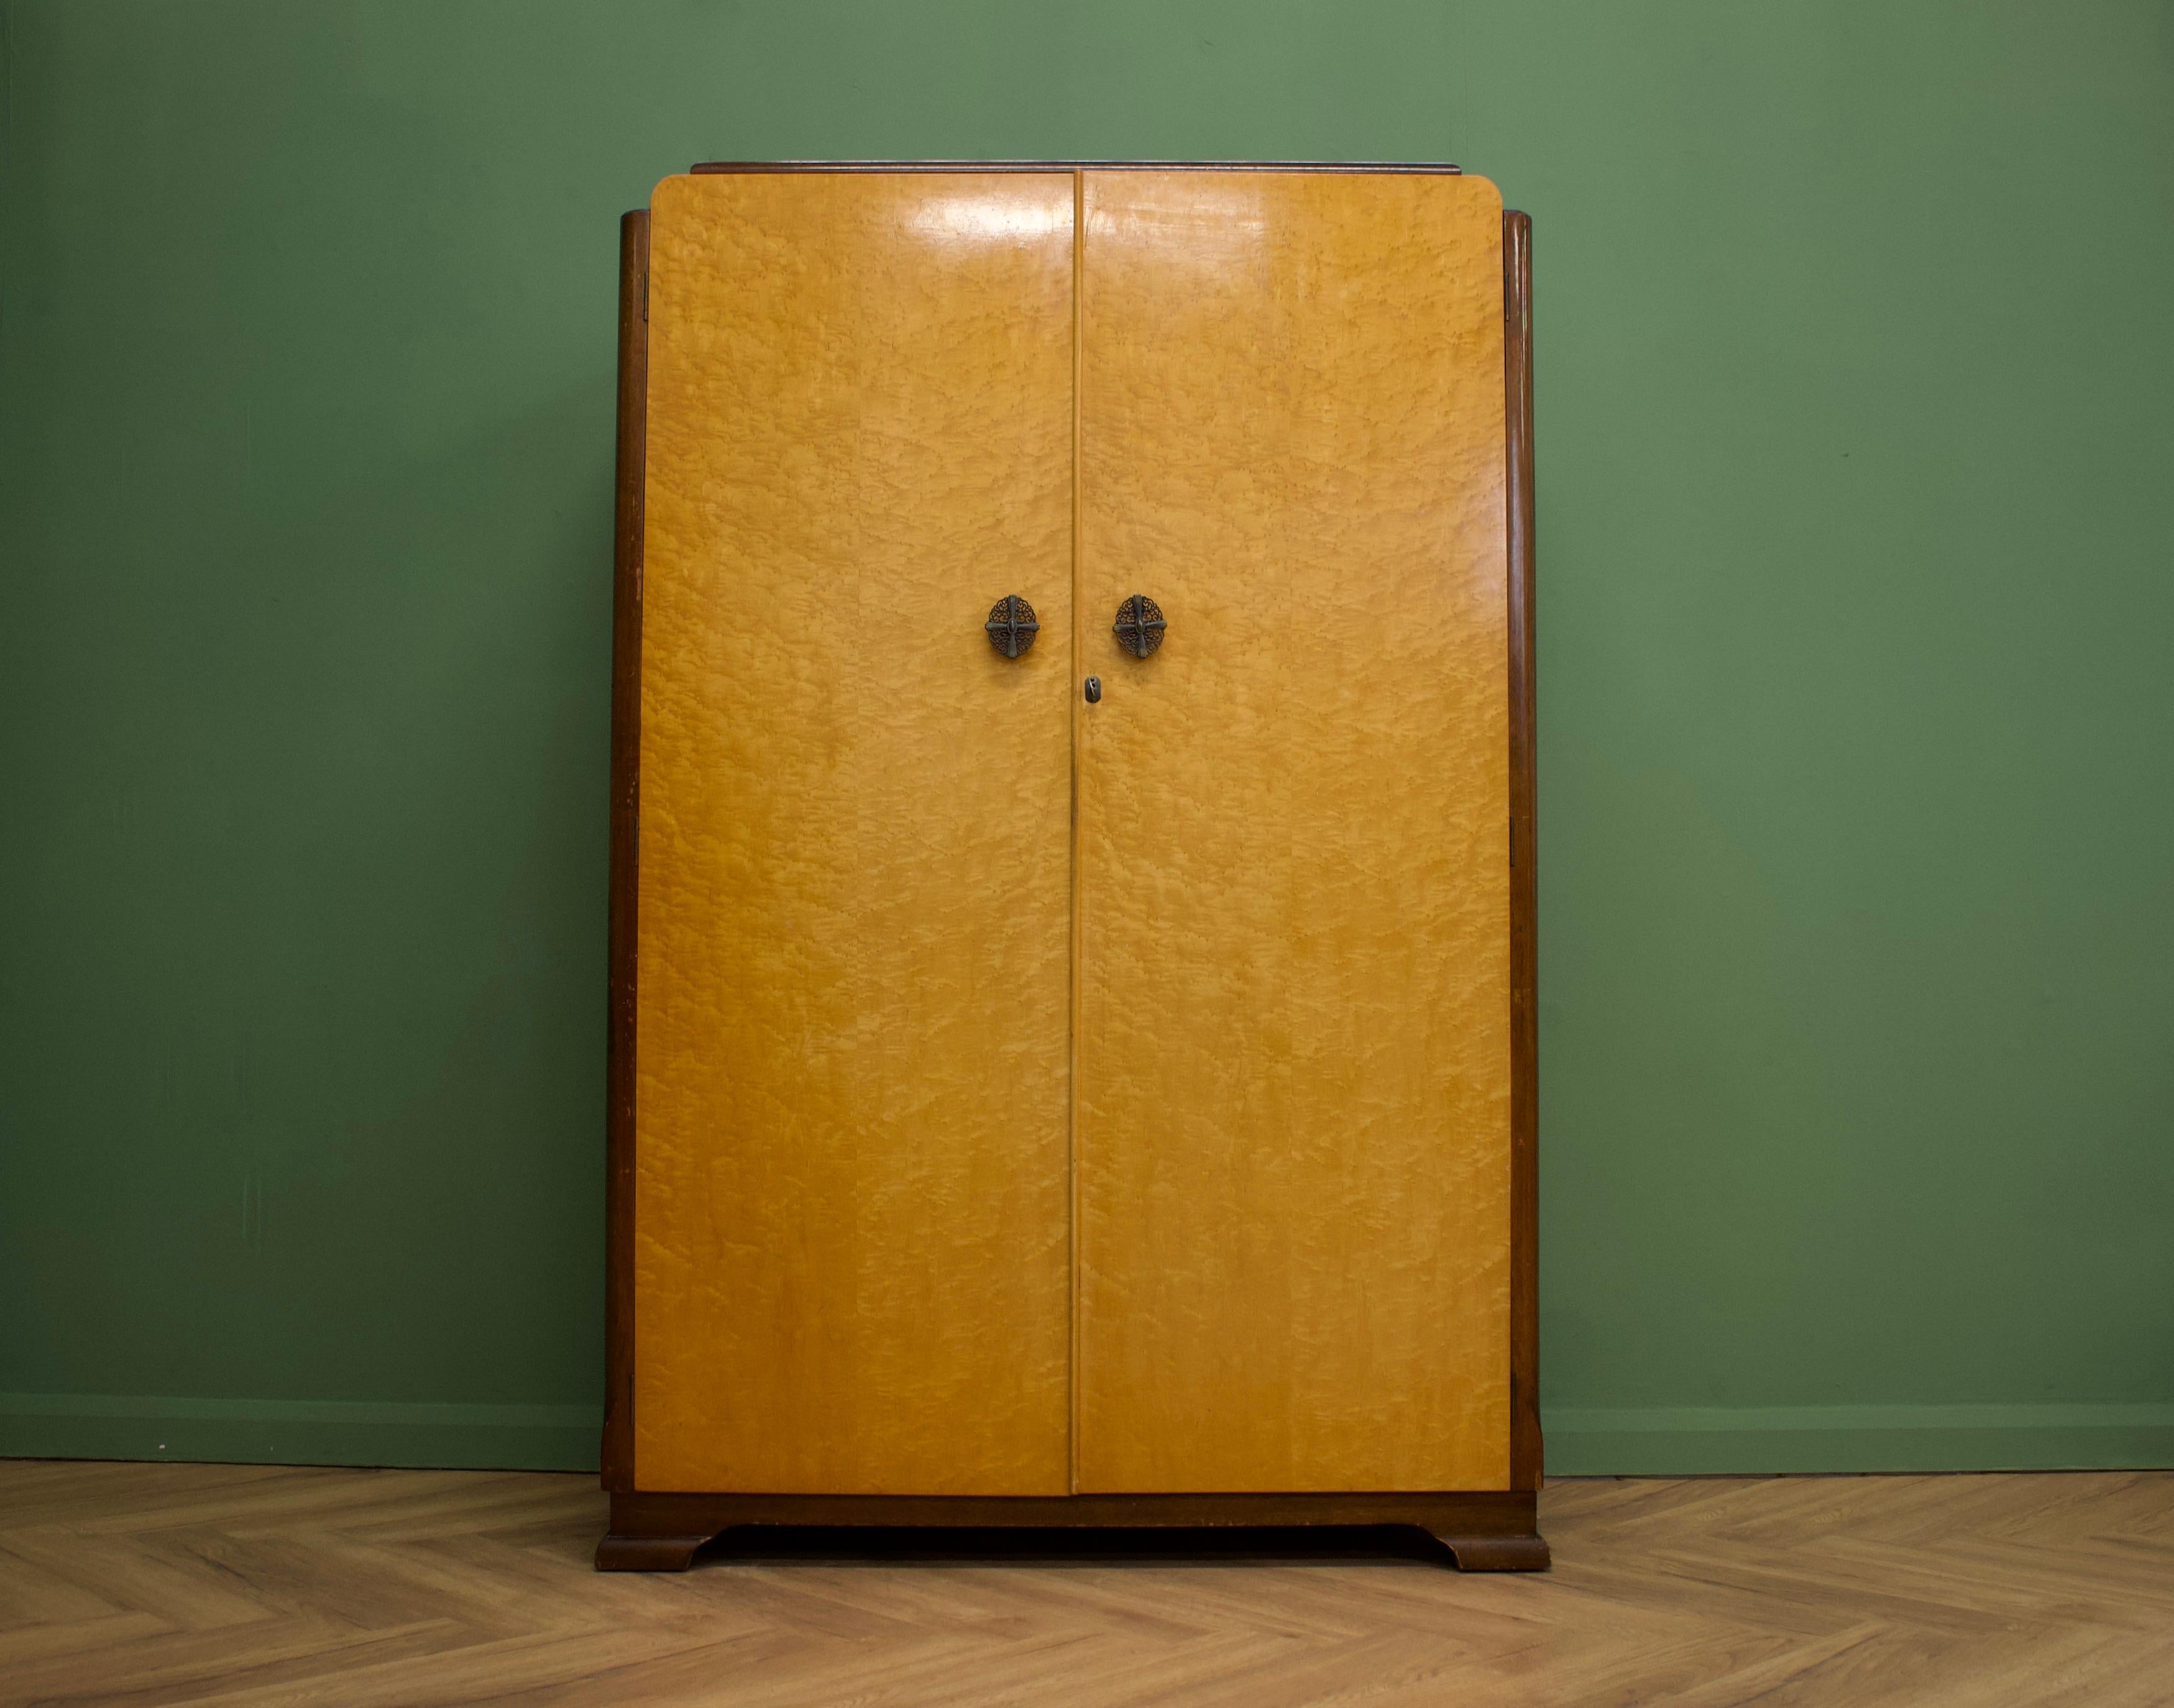 A 1940s Art Deco style birdseye maple wardrobe

Featuring two rails and a shelf

This wardrobe can separate in two halfs.